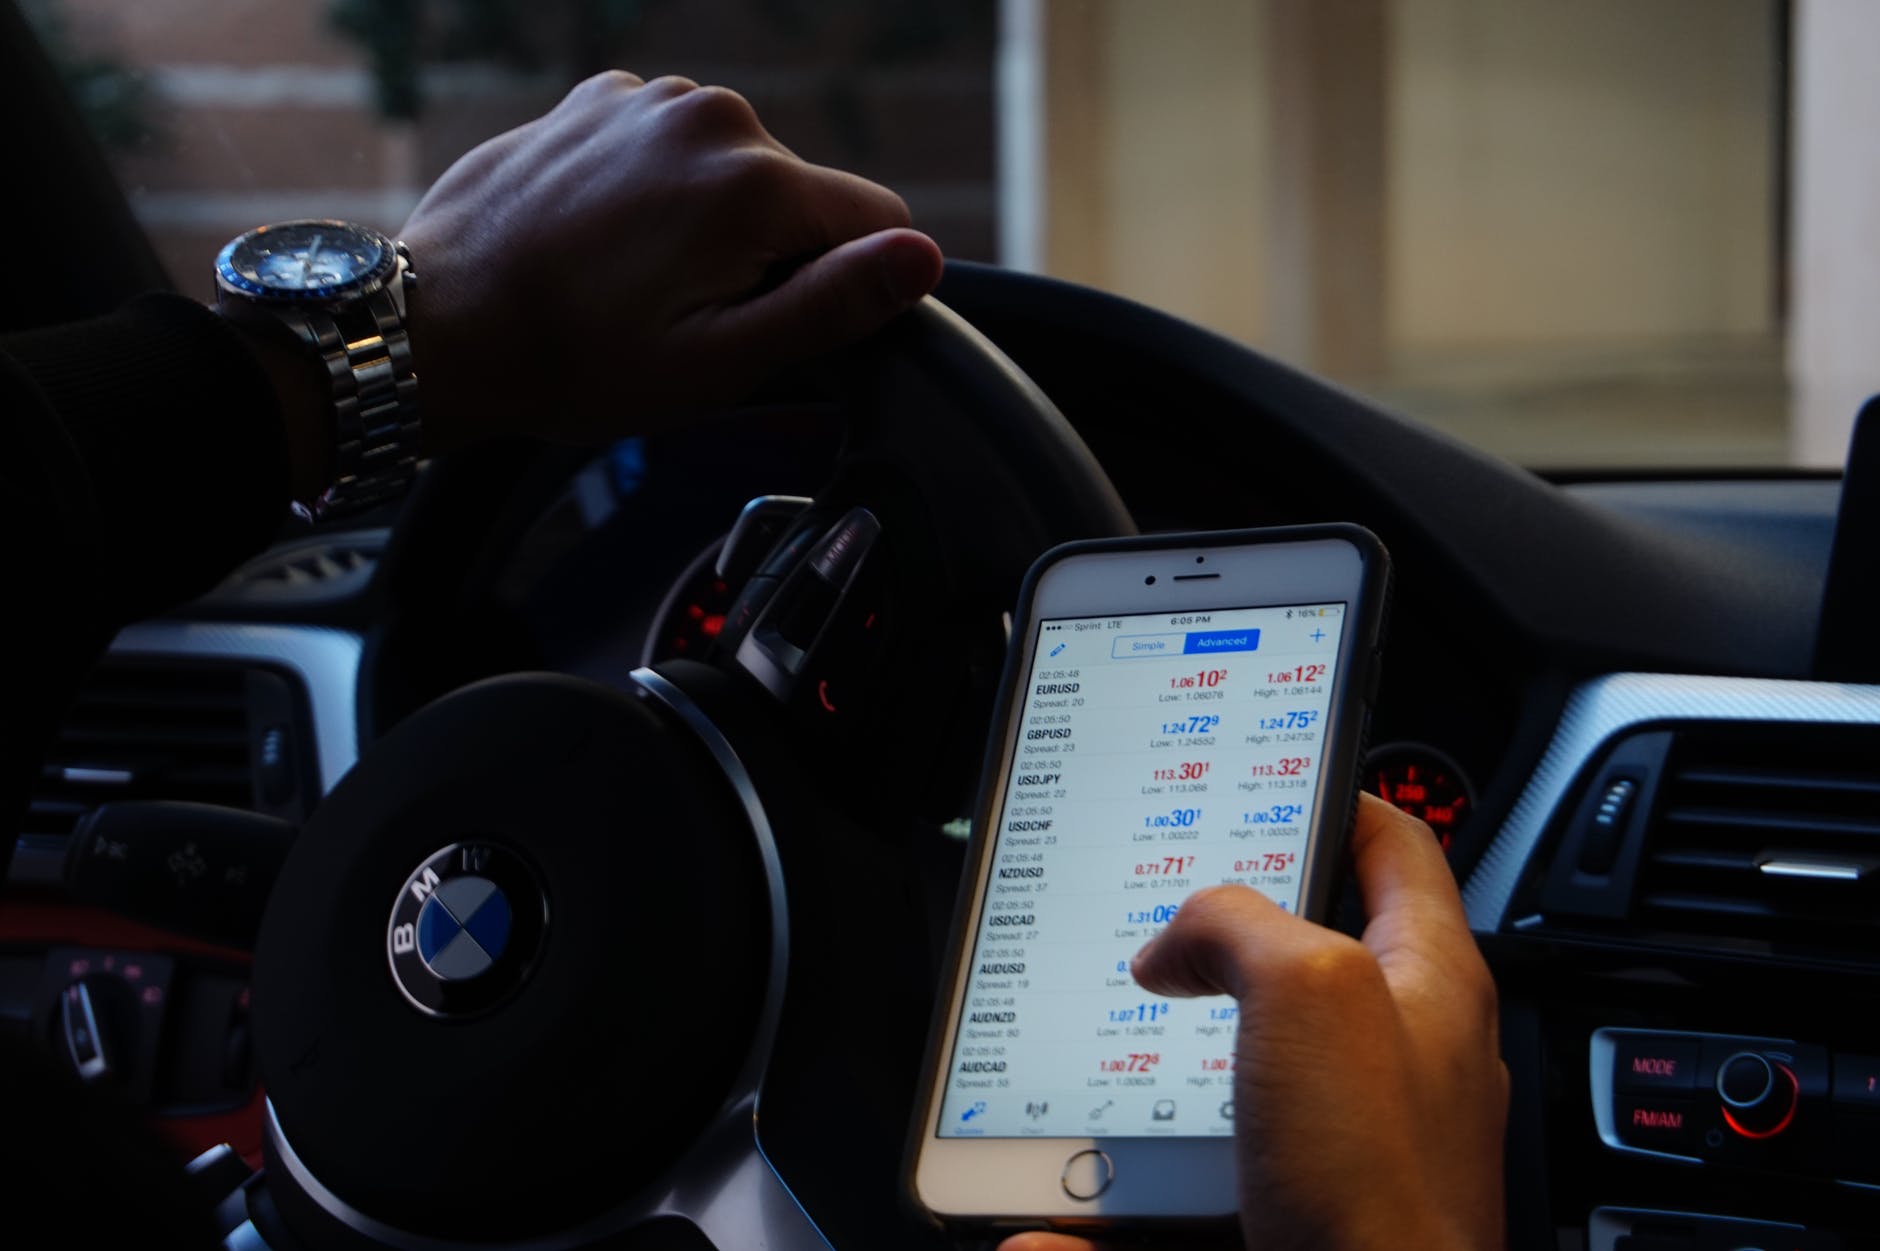 Driving while checking the phone | Source: Pexels